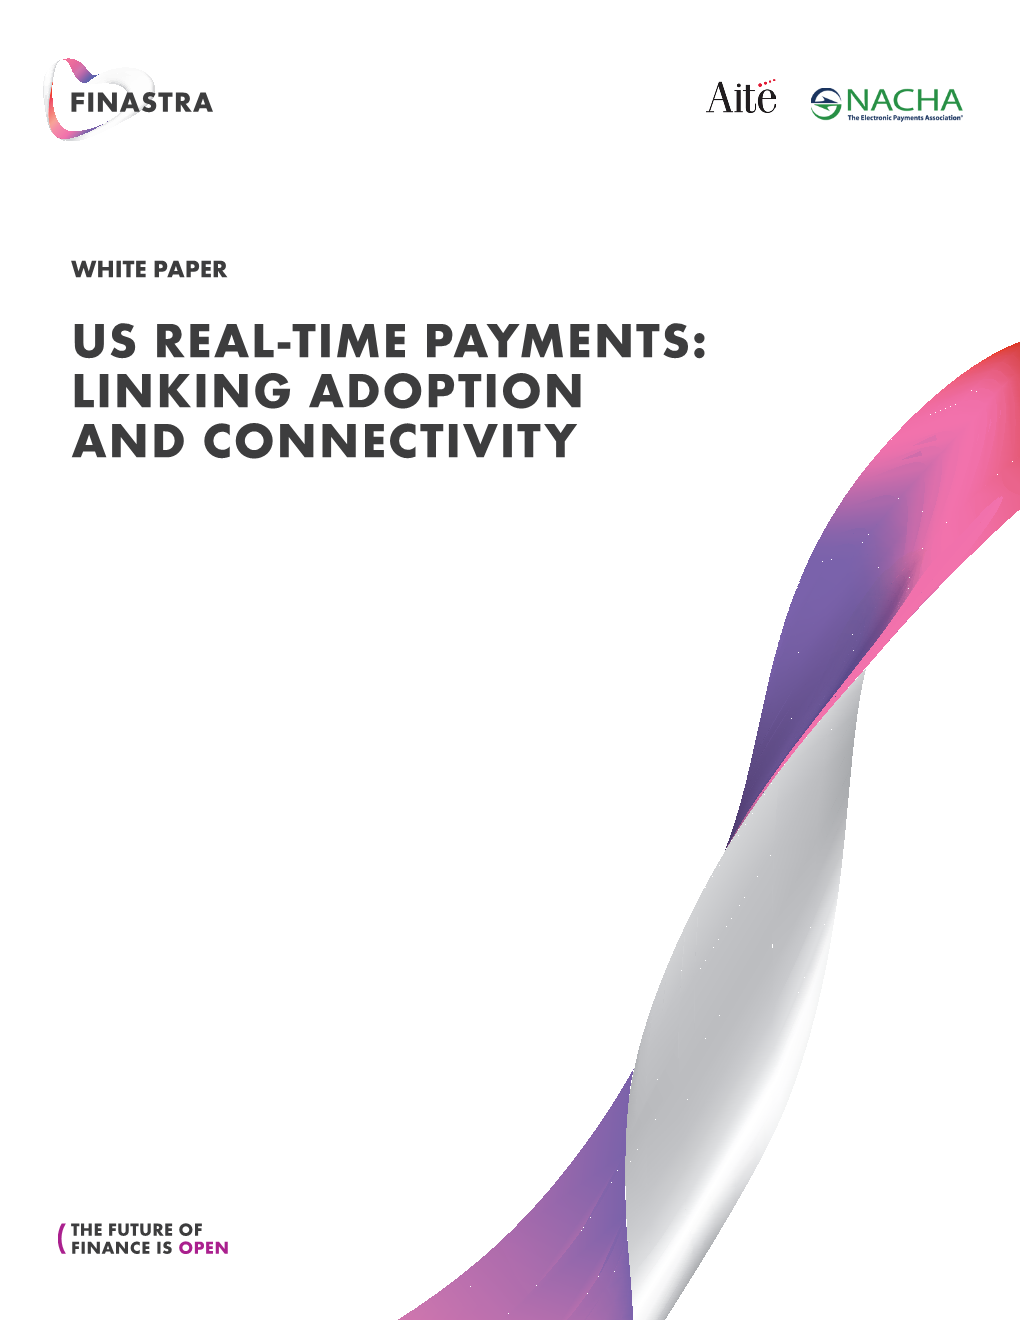 Us Real-Time Payments: Linking Adoption and Connectivity Introduction